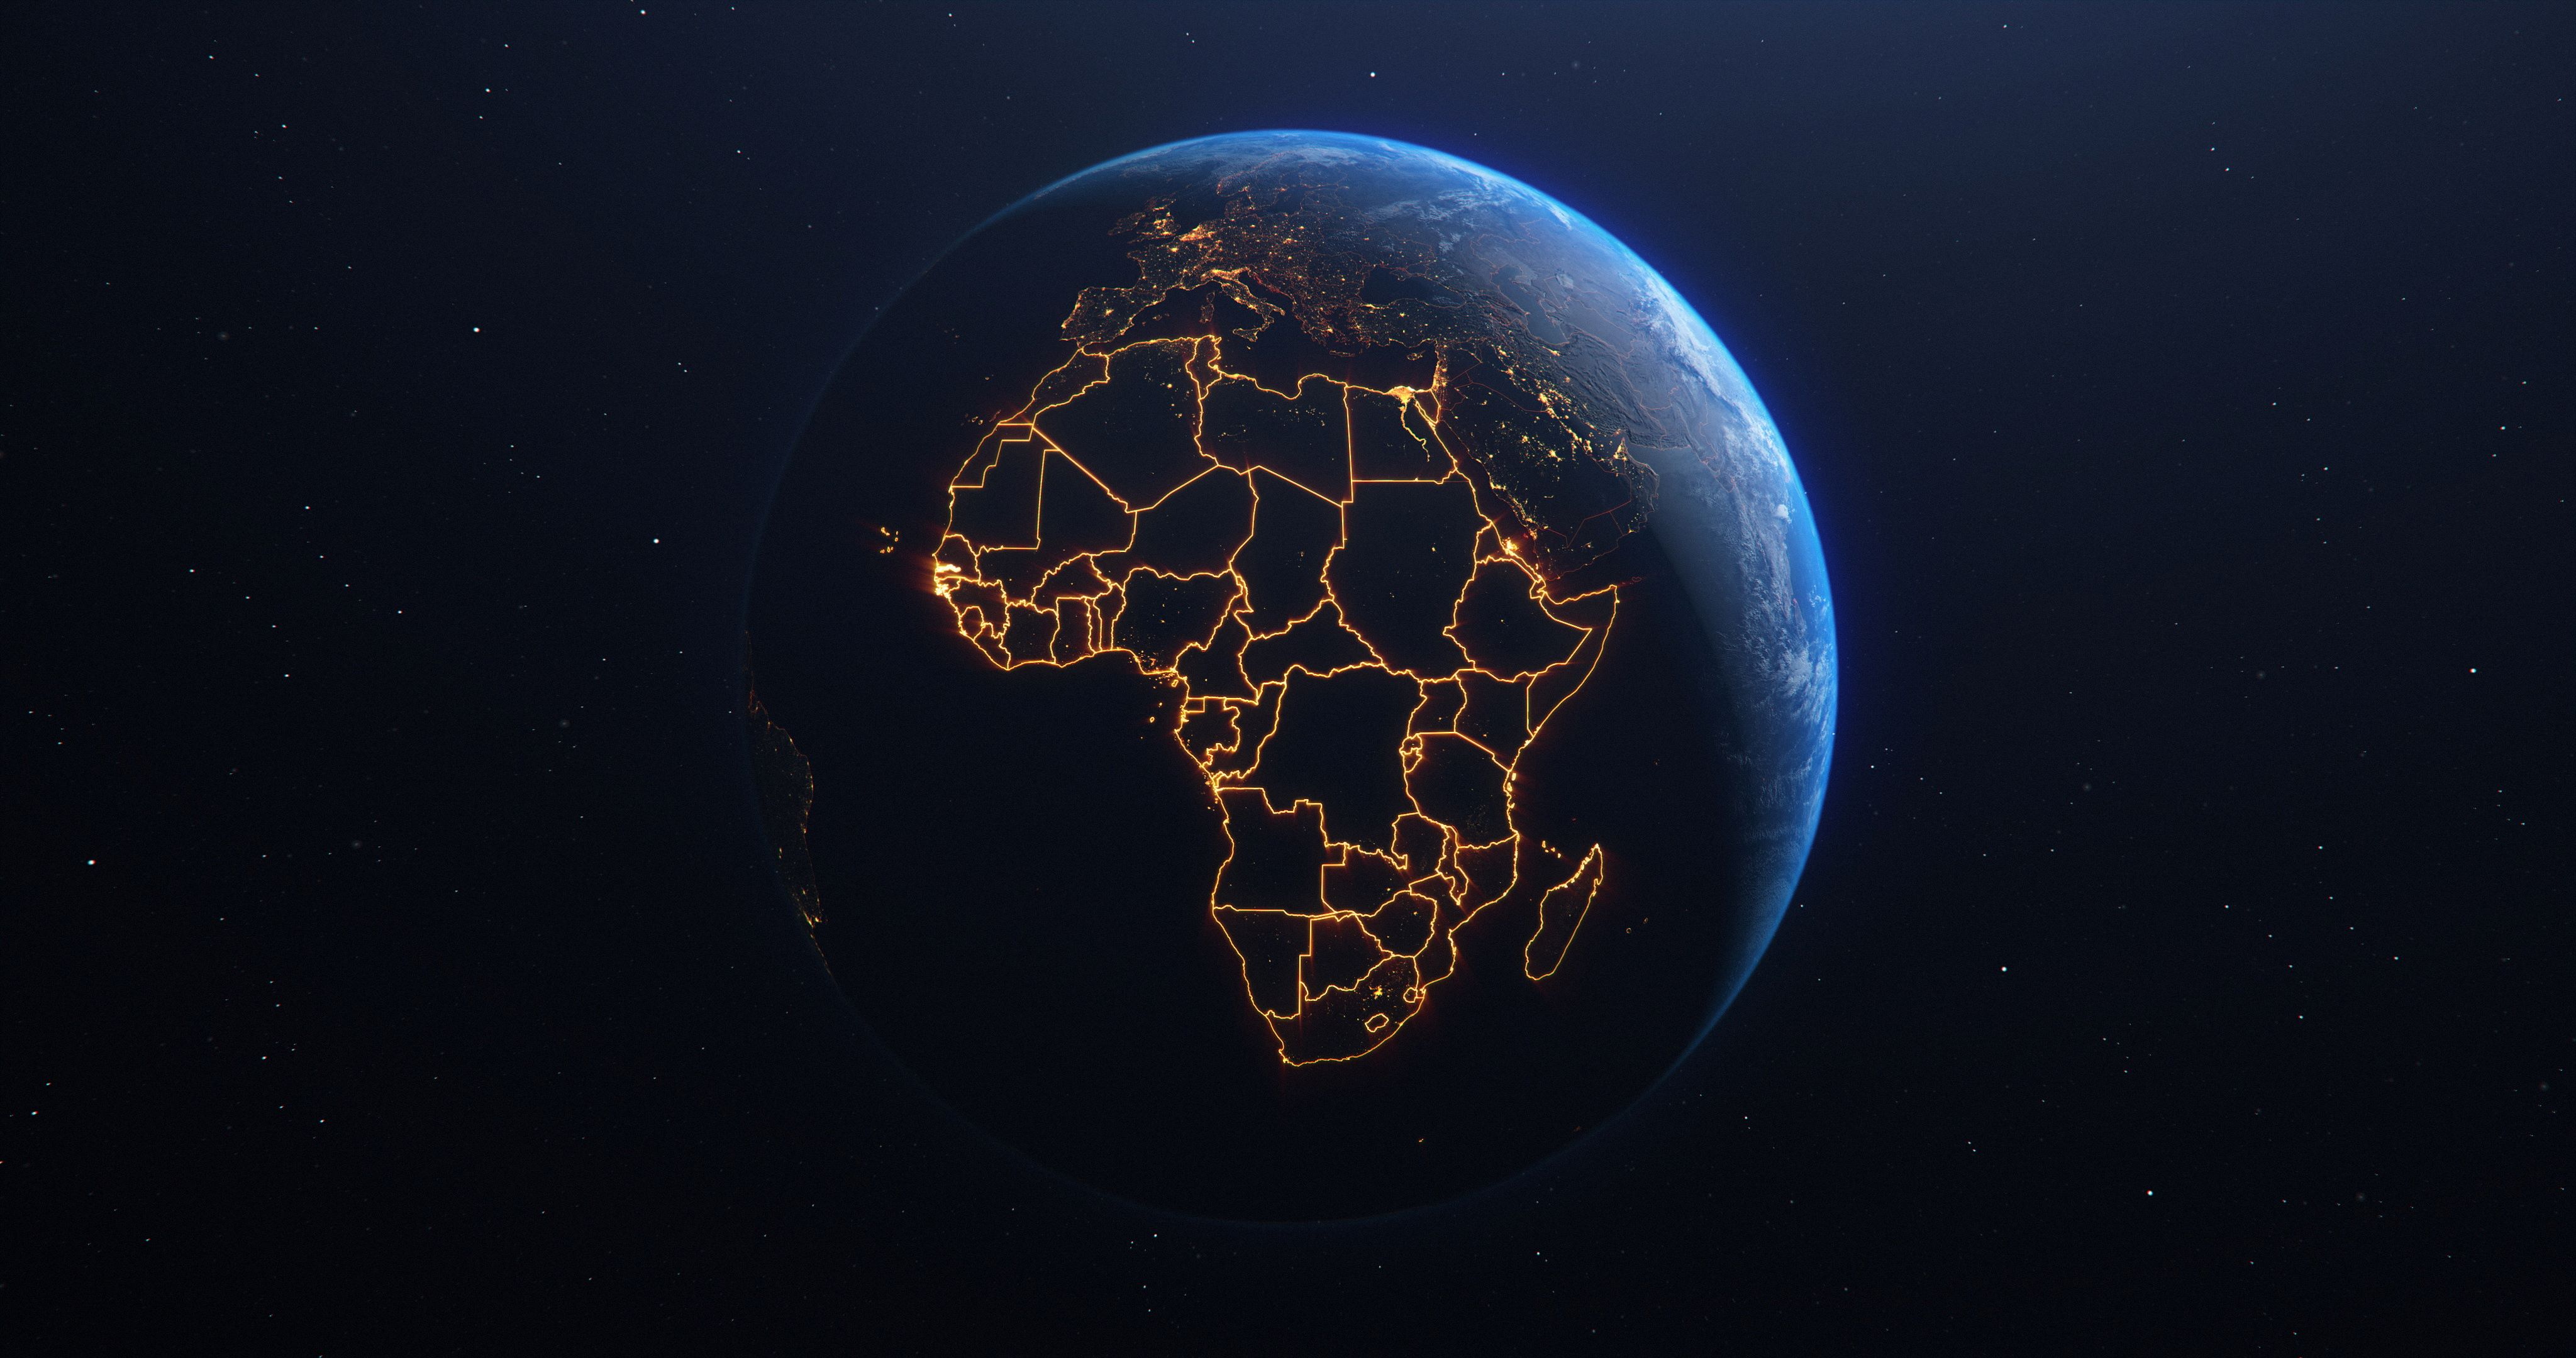 African continent with borders lit up